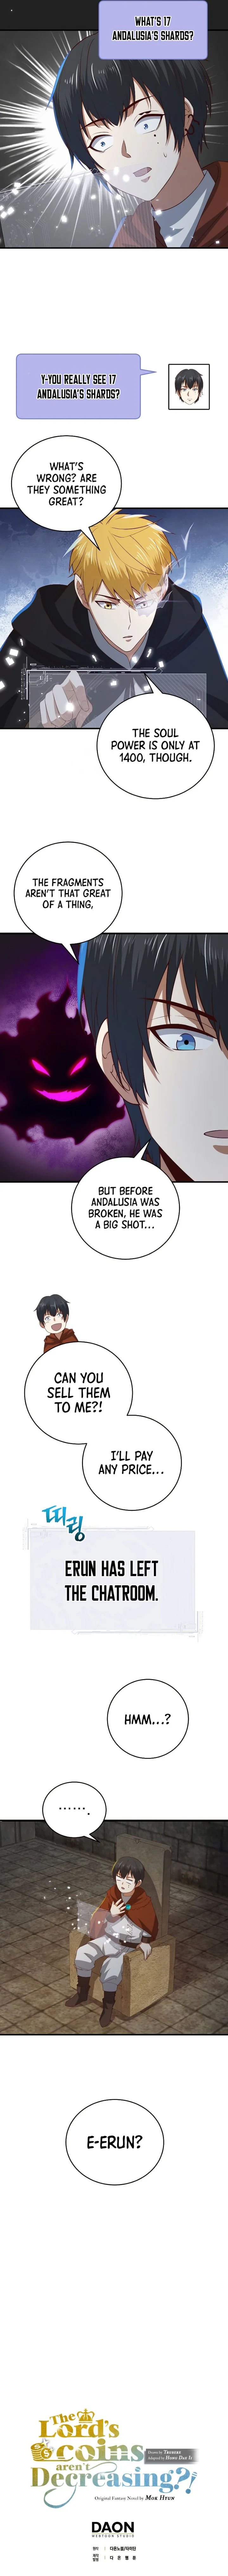 The Lord’s Coins Aren’t Decreasing?! - Chapter 96 Page 10